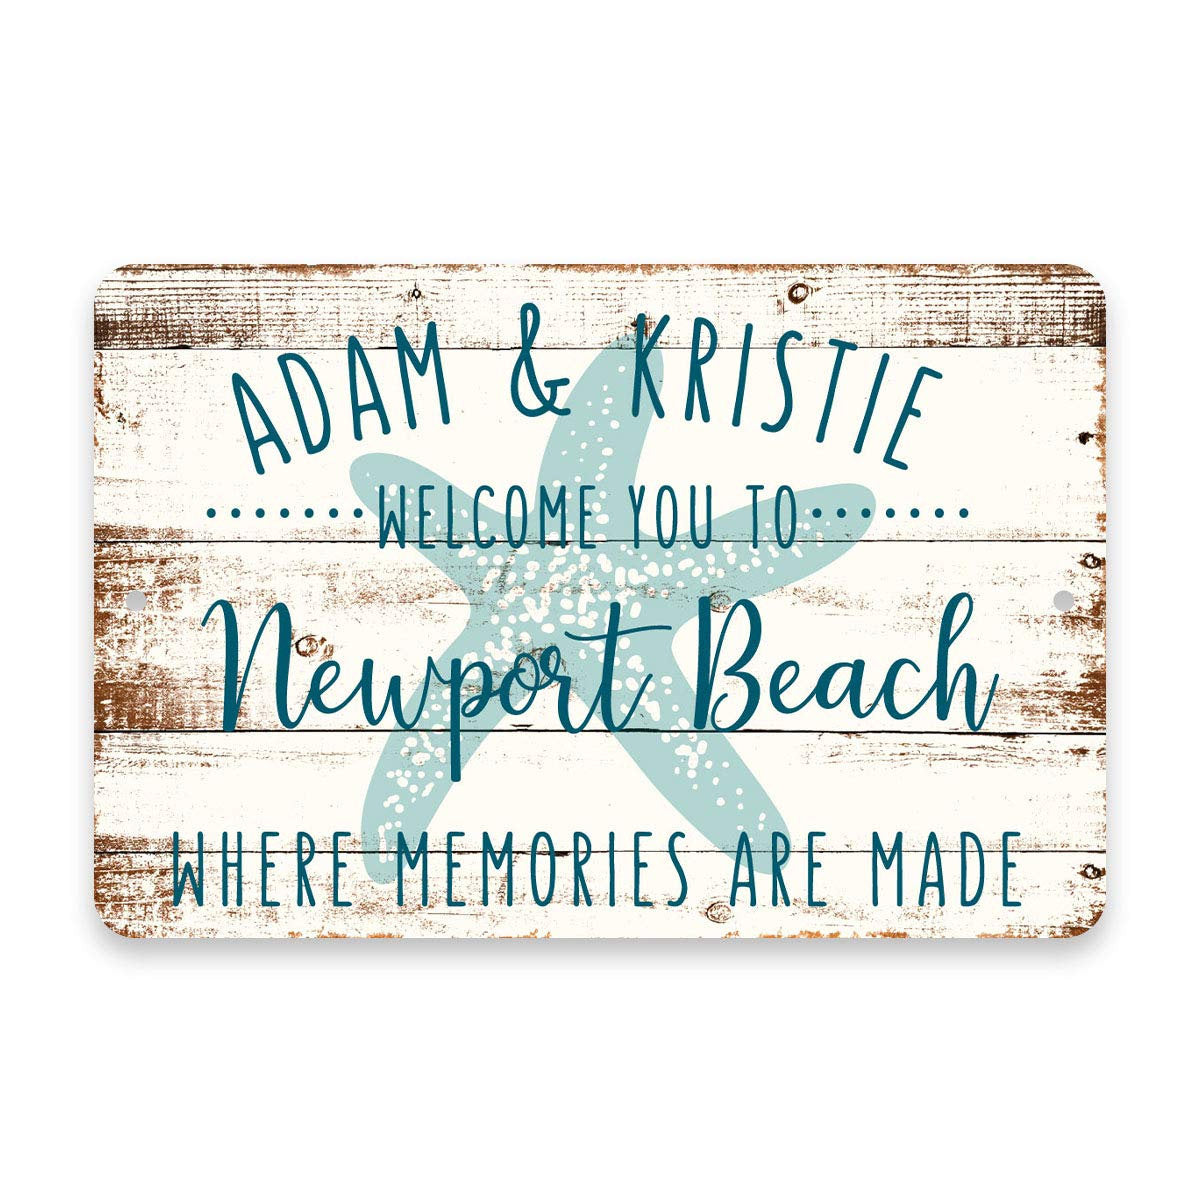 Personalized Welcome to Newport Beach Where Memories are Made Sign - 8 X 12 Metal Sign with Wood Look